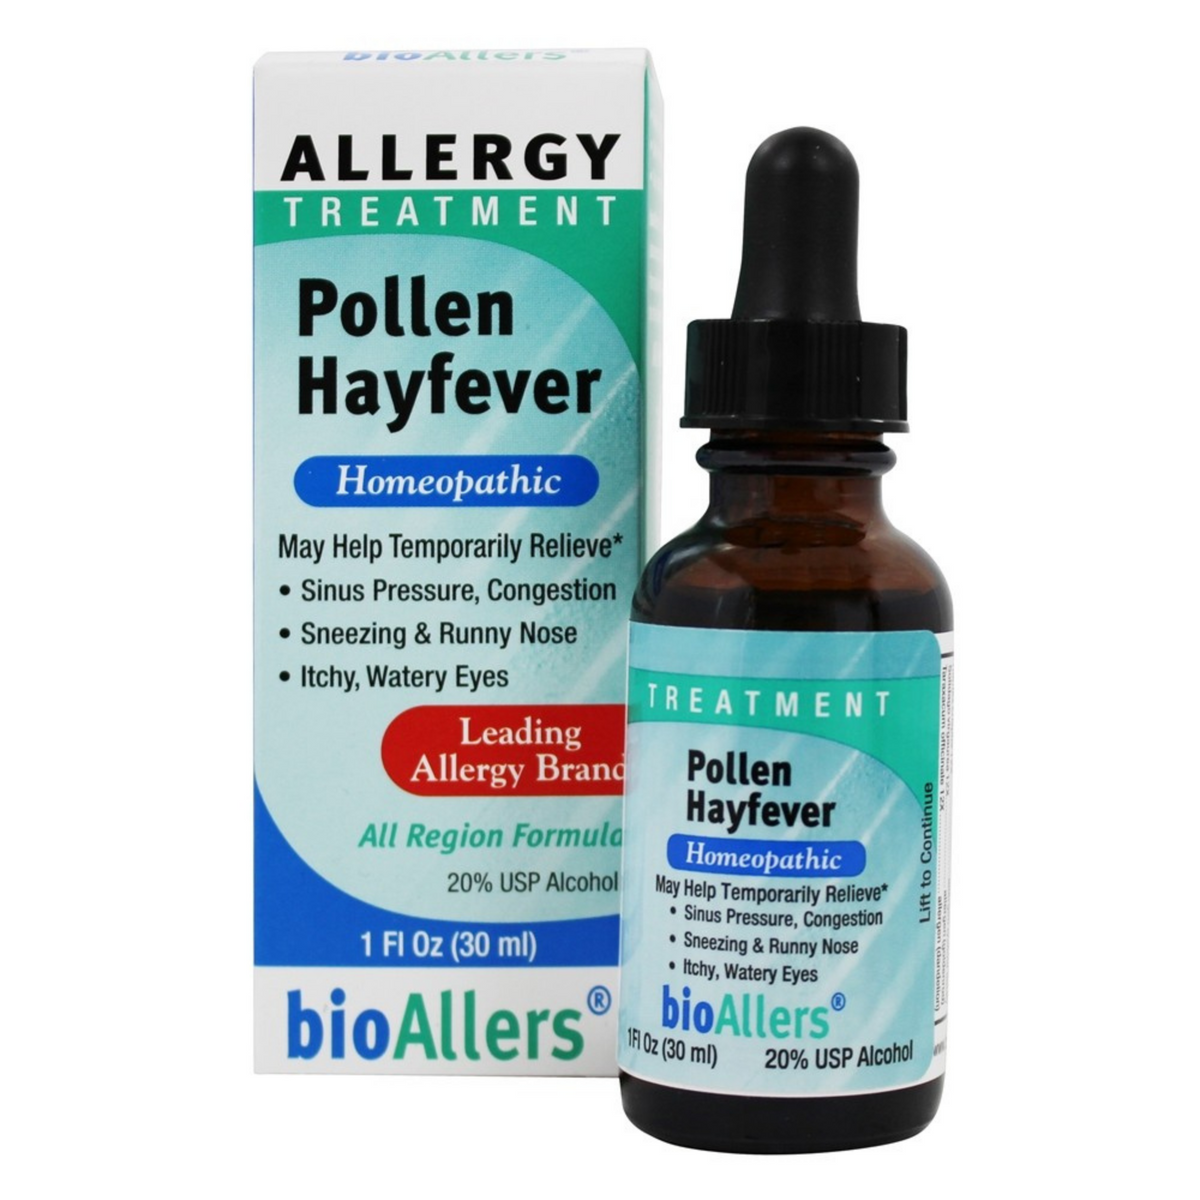 Primary image of Pollen/Hay fever